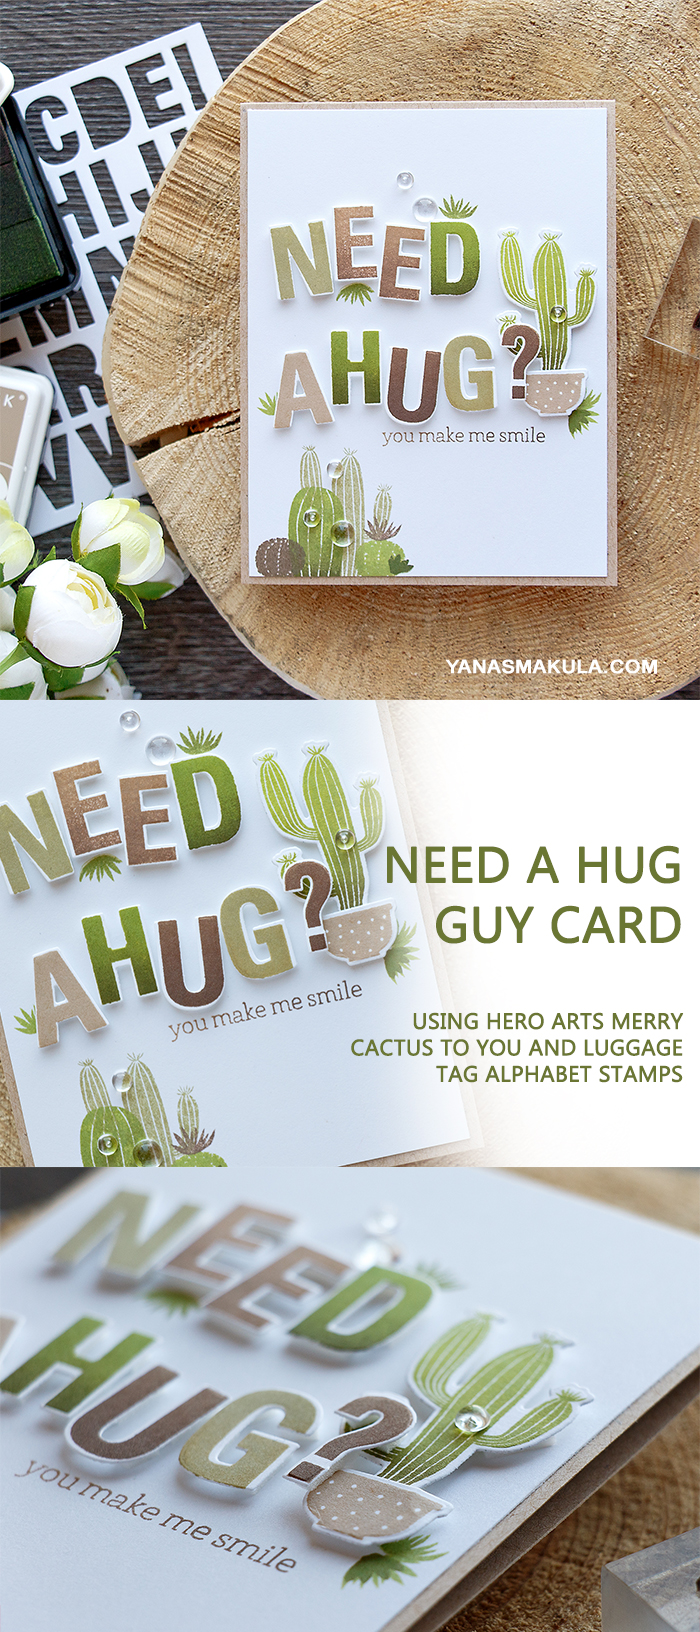 Need a Hug Guy Card Using Hero Arts Merry Cactus to You and Luggage Tag Alphabet Stamps